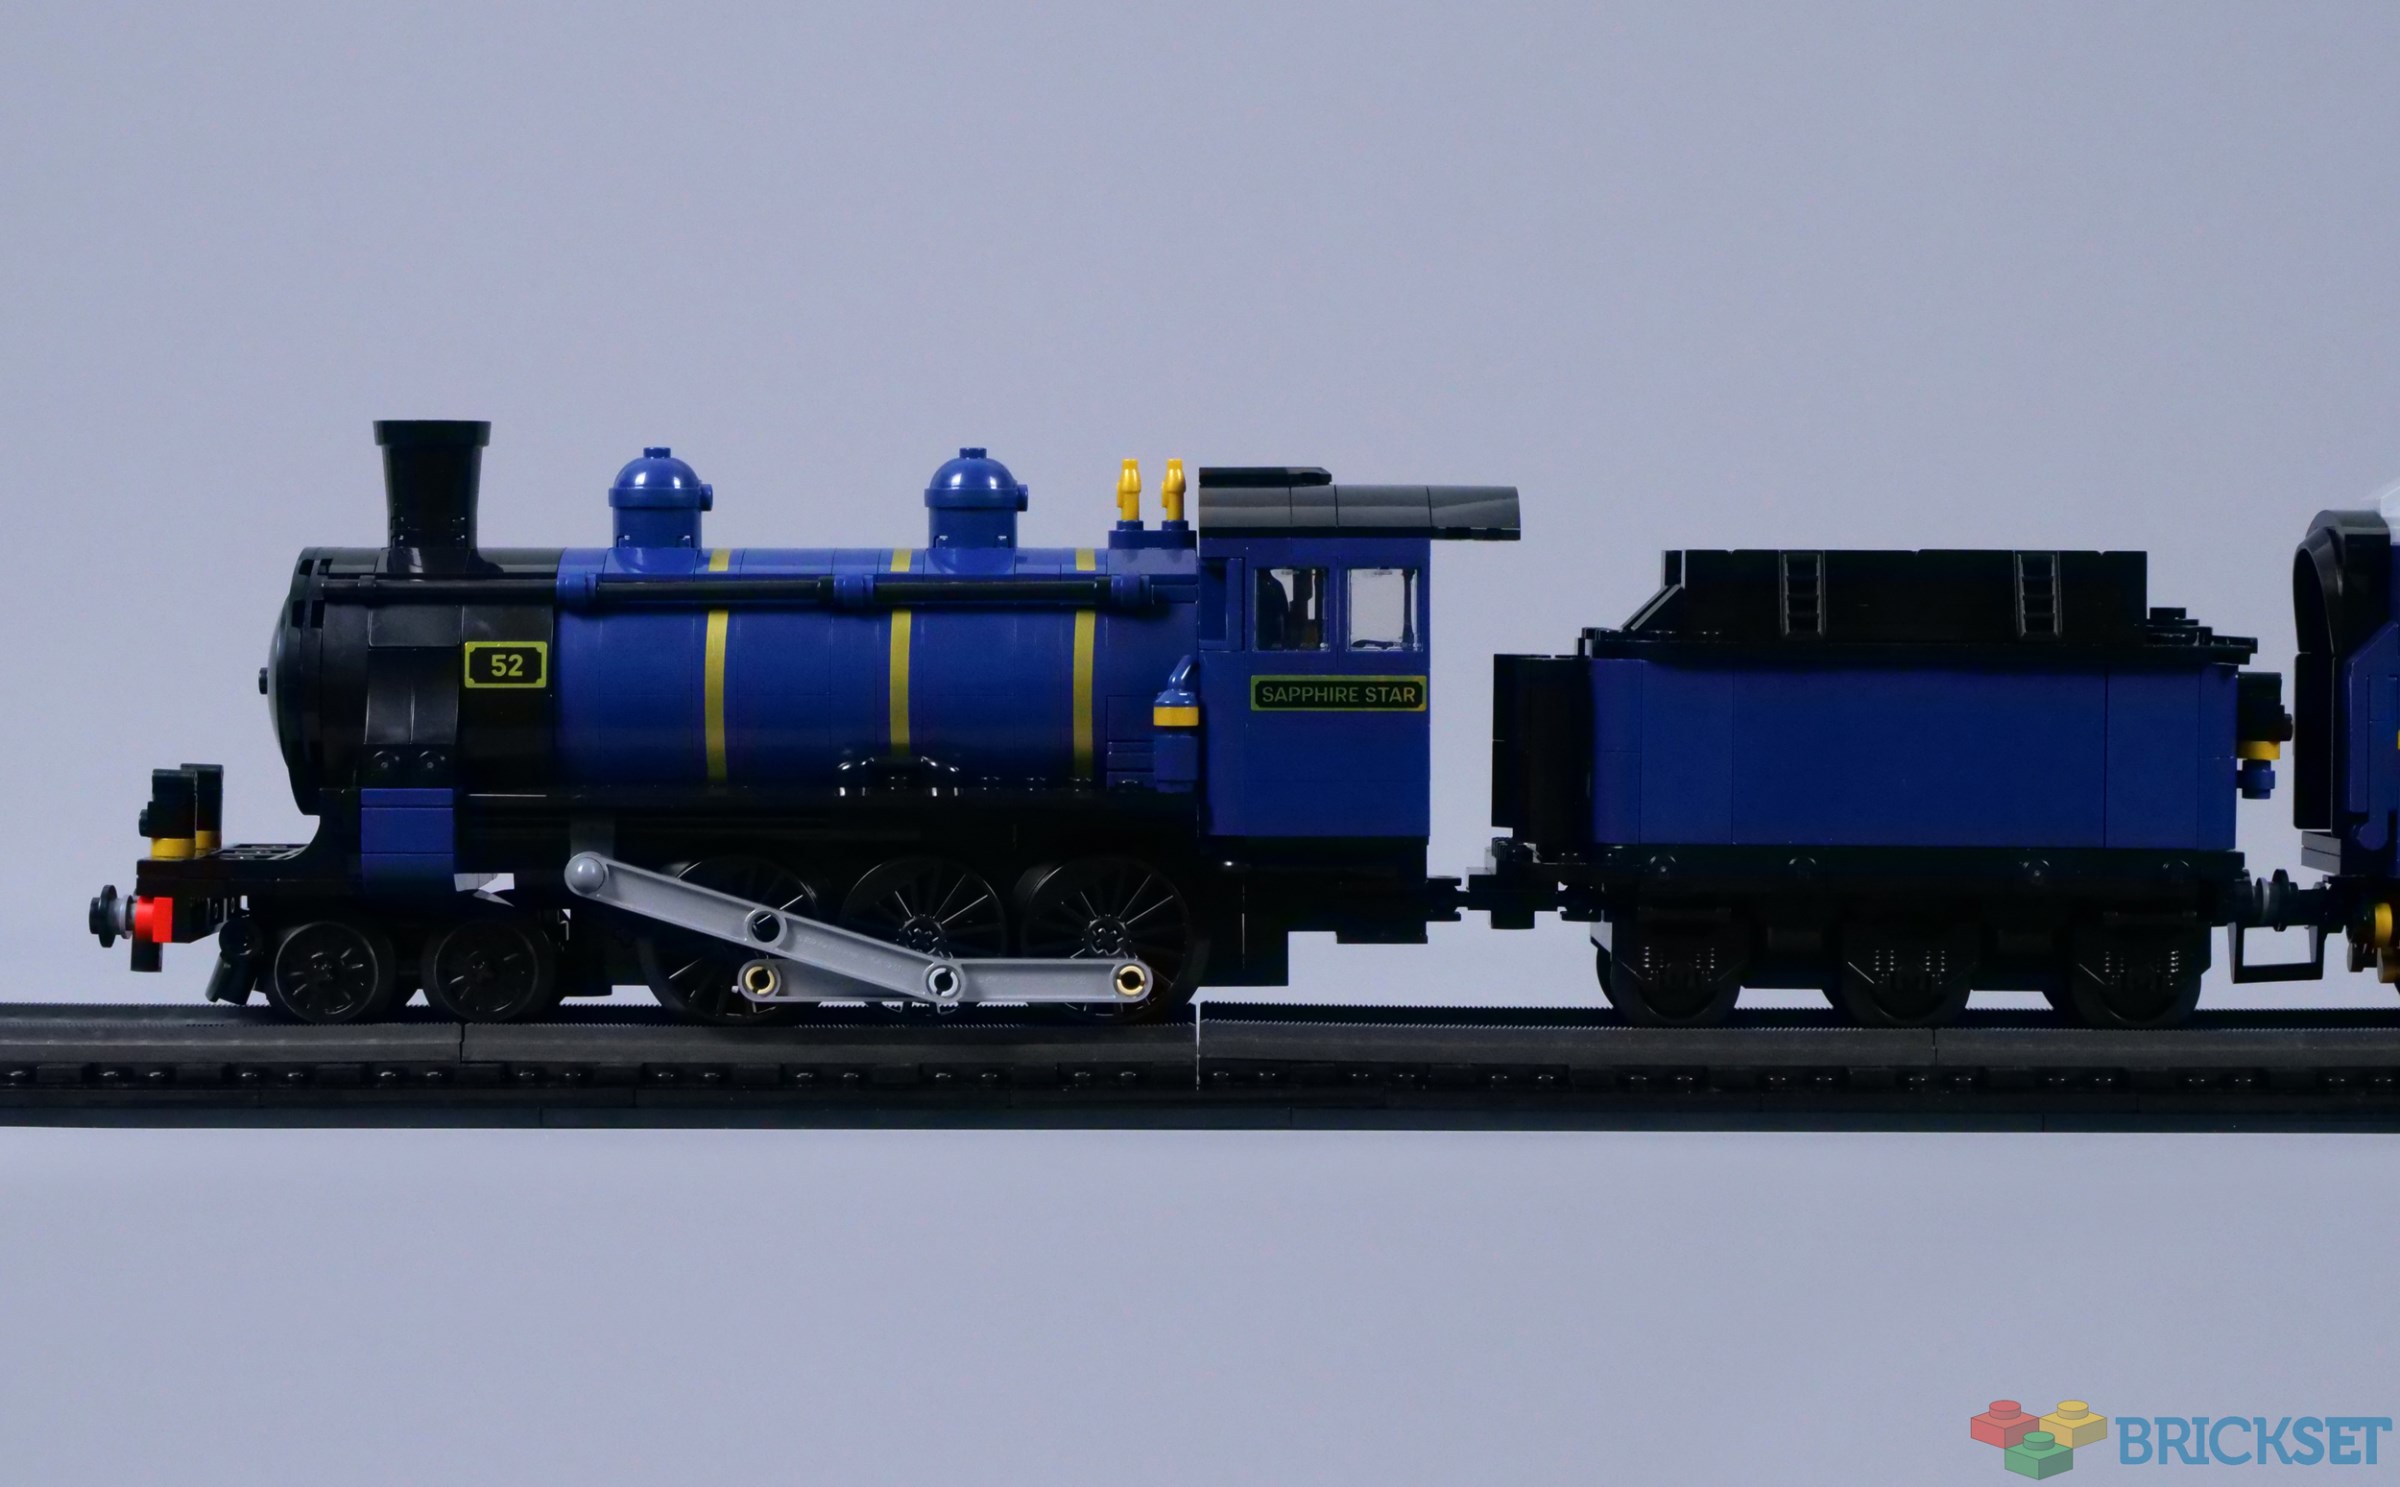 Can anyone figure out what the leaked LEGO Orient Express locomotive is  based on? I haven't seen anyone identify it yet. : r/trains